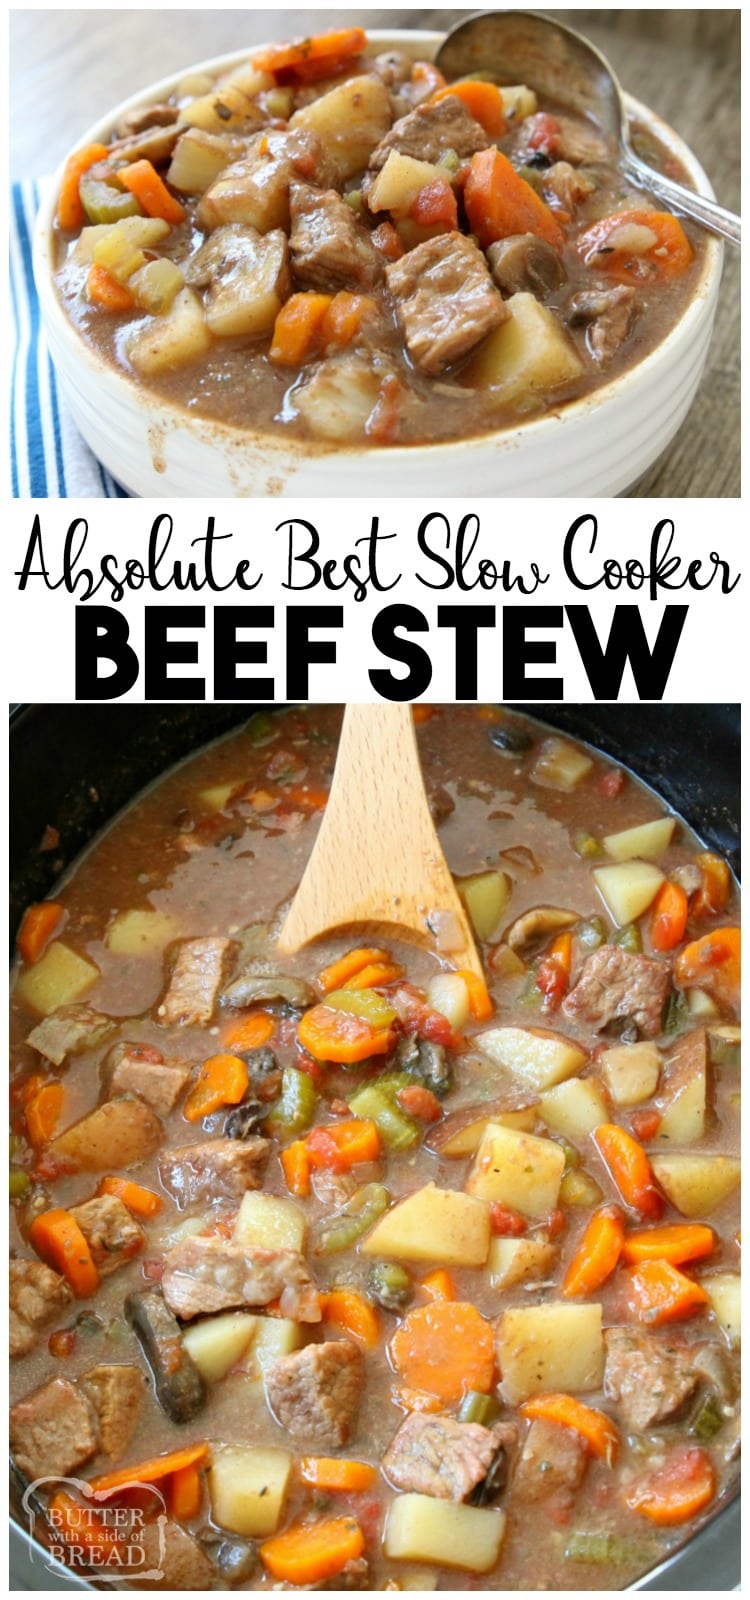 Beef Stew Crock Pot recipe made with tender chunks of beef, loads of vegetables and a simple mixture of broth and spices that yields the BEST slow cooker beef stew ever! #beef #stew #crockpot #slowcooker #beefstew #stewrecipe #beefcrockpot #recipe from BUTTER WITH A SIDE OF BREAD